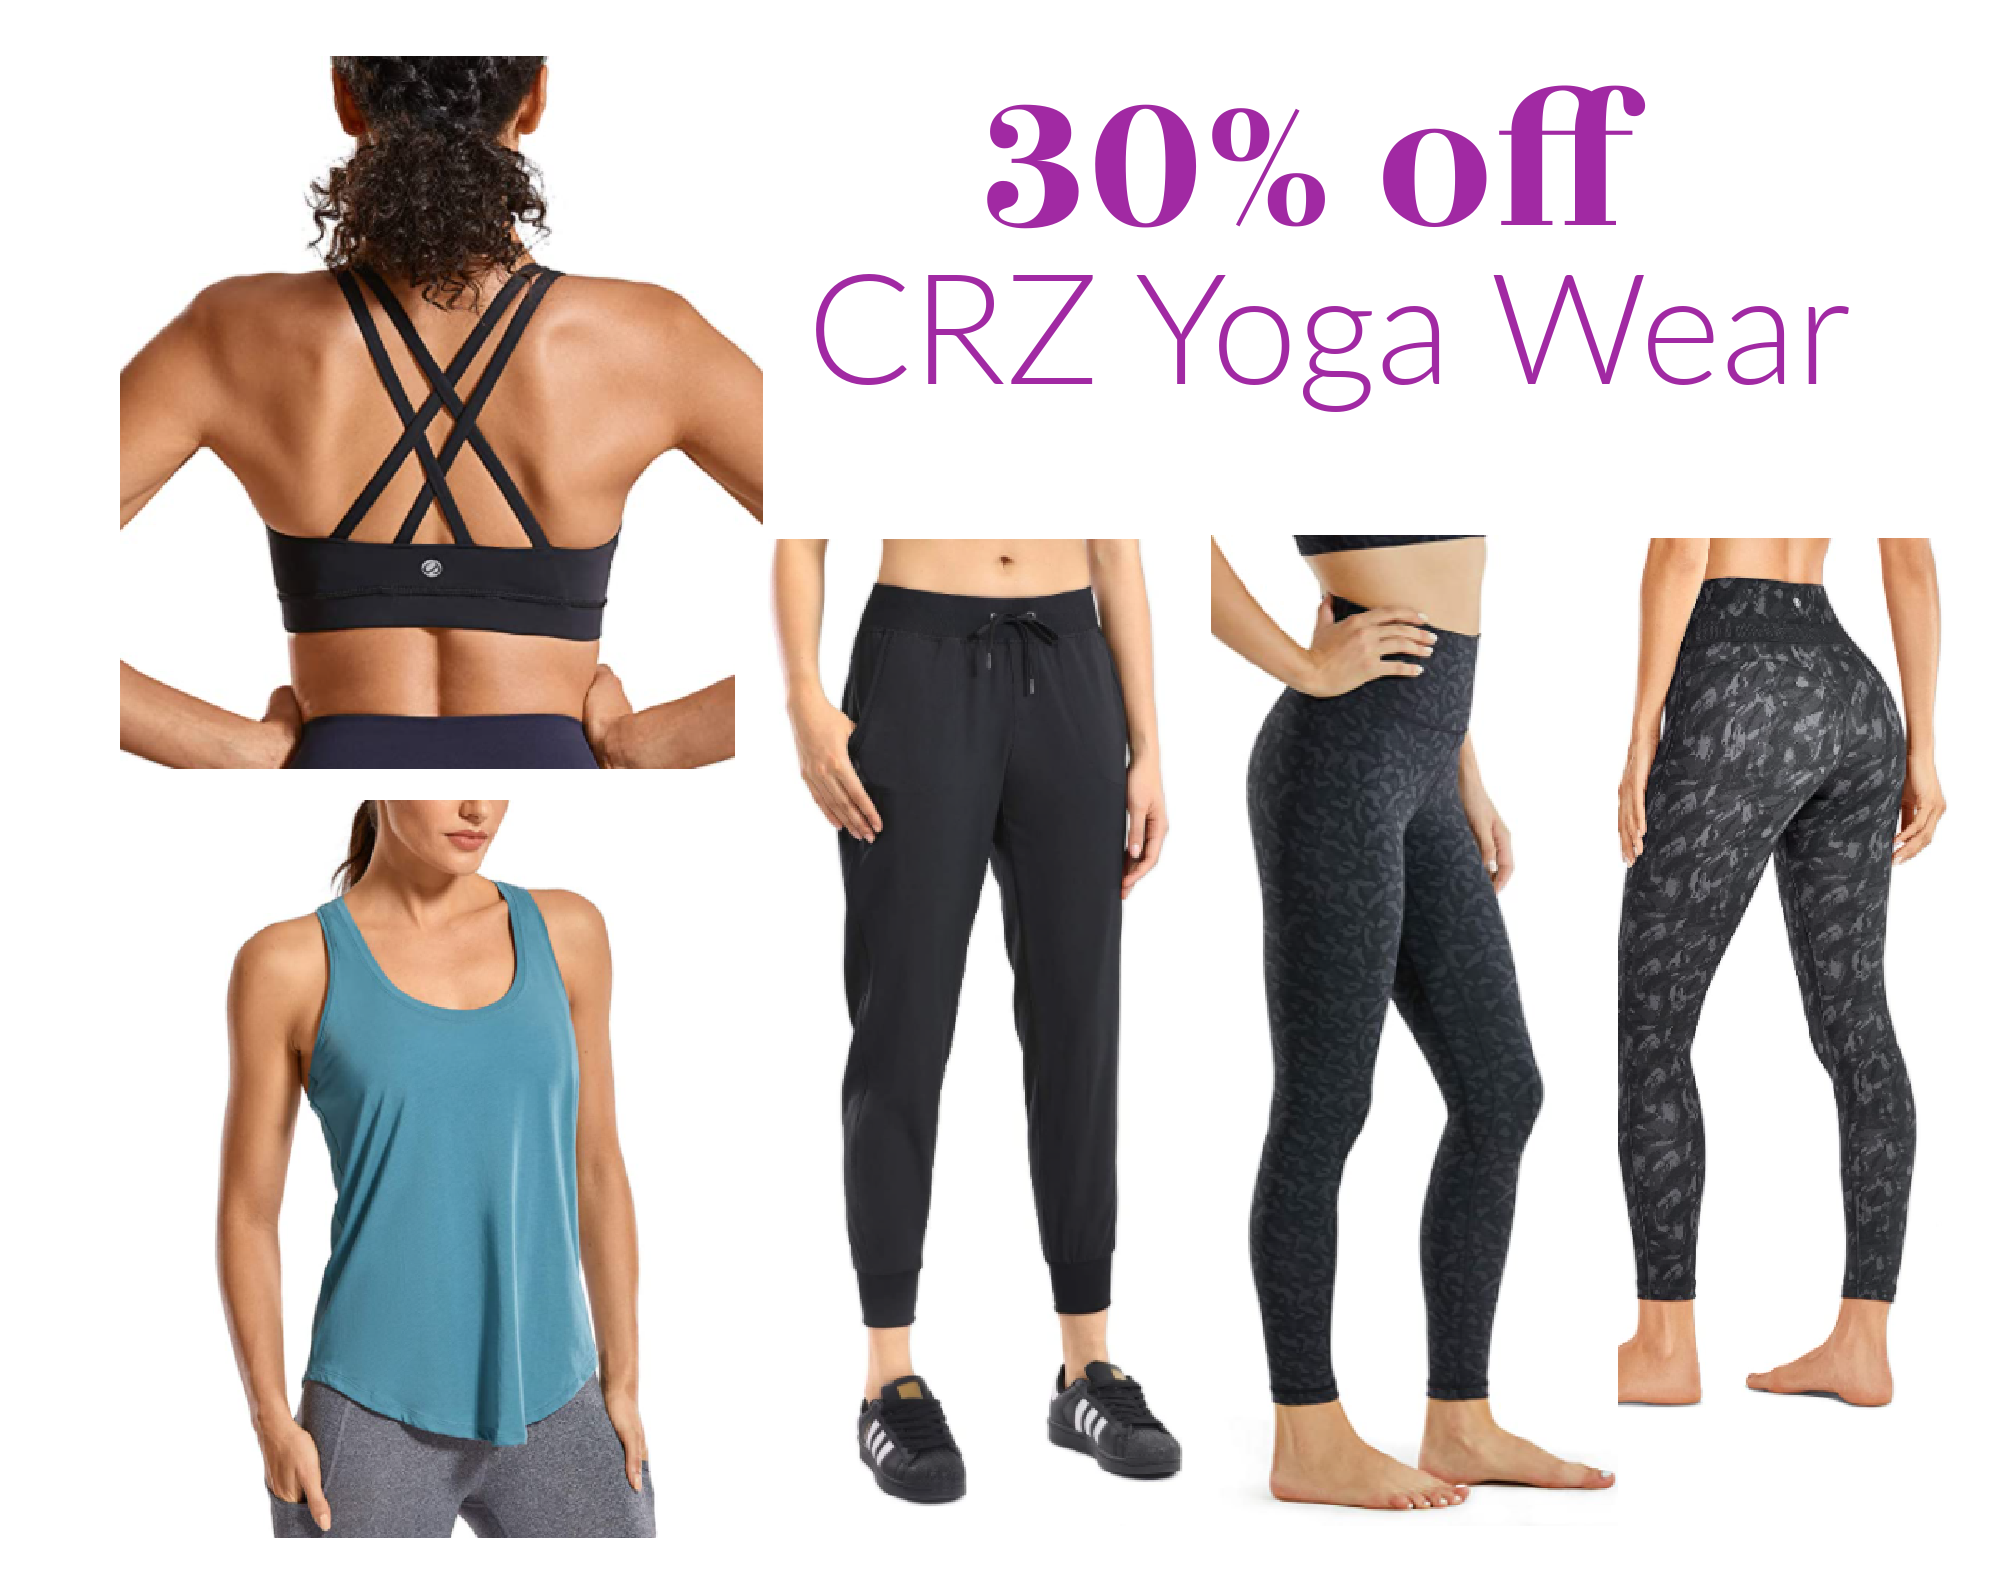 Crz Yoga Clothing Prime Day Deals going on NOW!!!